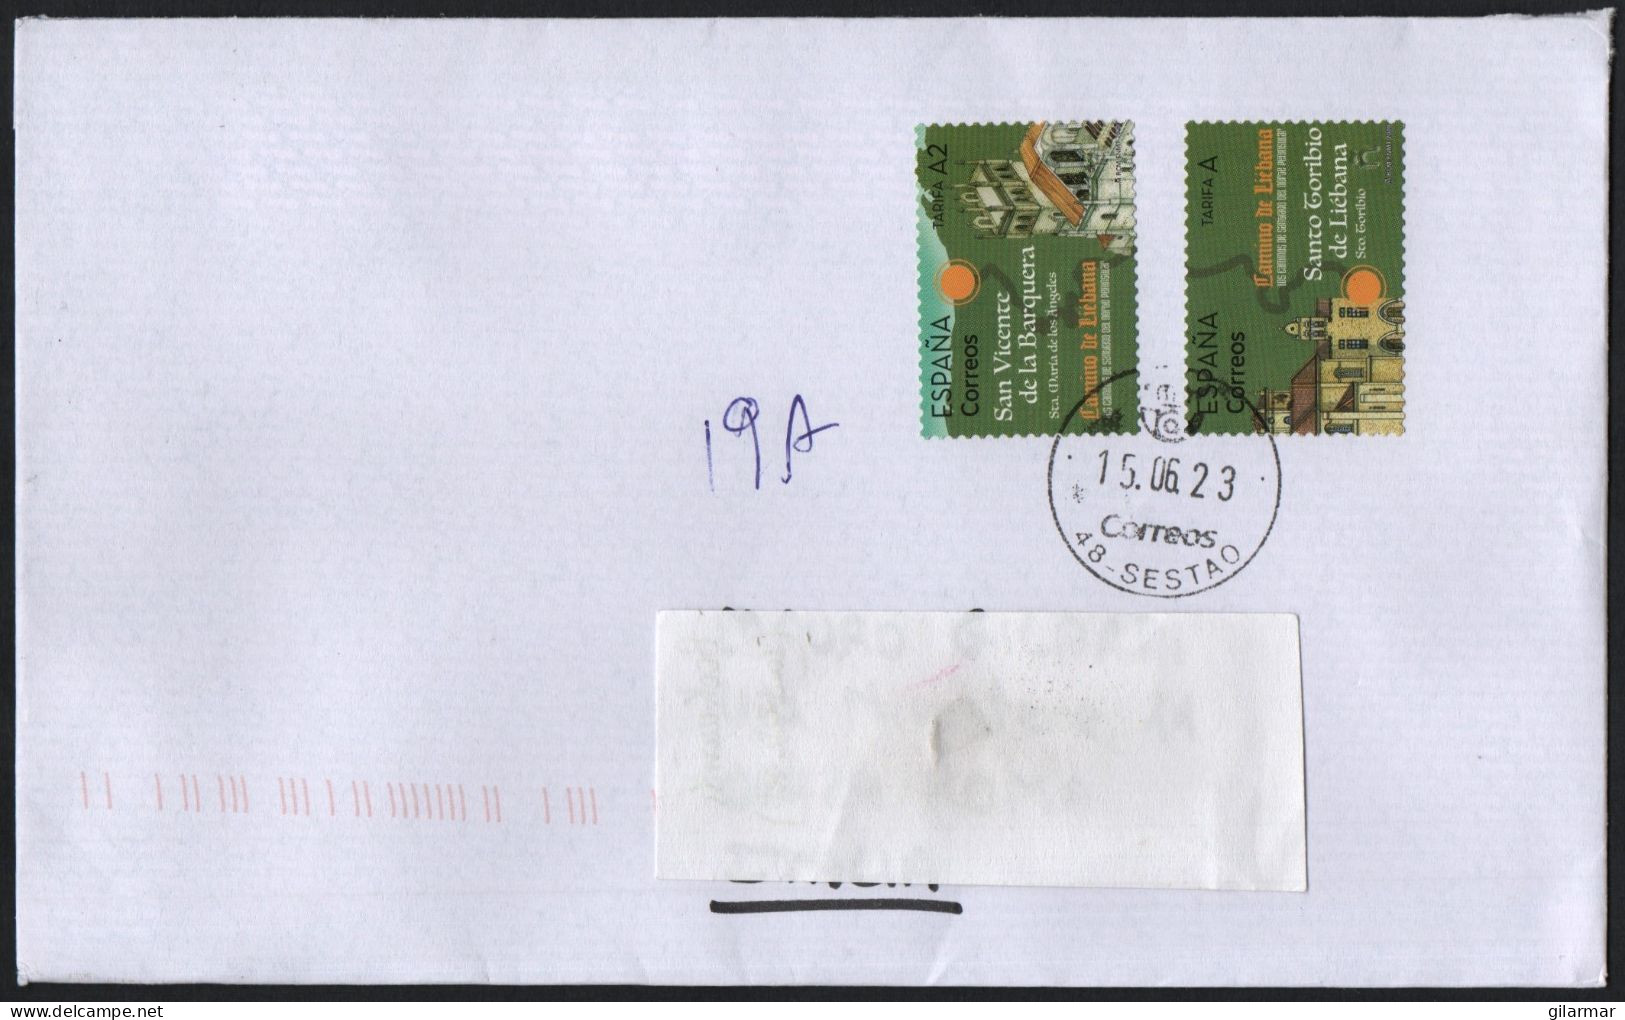 SPAIN 2023 - MAILED ENVELOPE - THE ROUTE OF ST. JAMES' WAY IN NORTHERN SPAIN - Cartas & Documentos